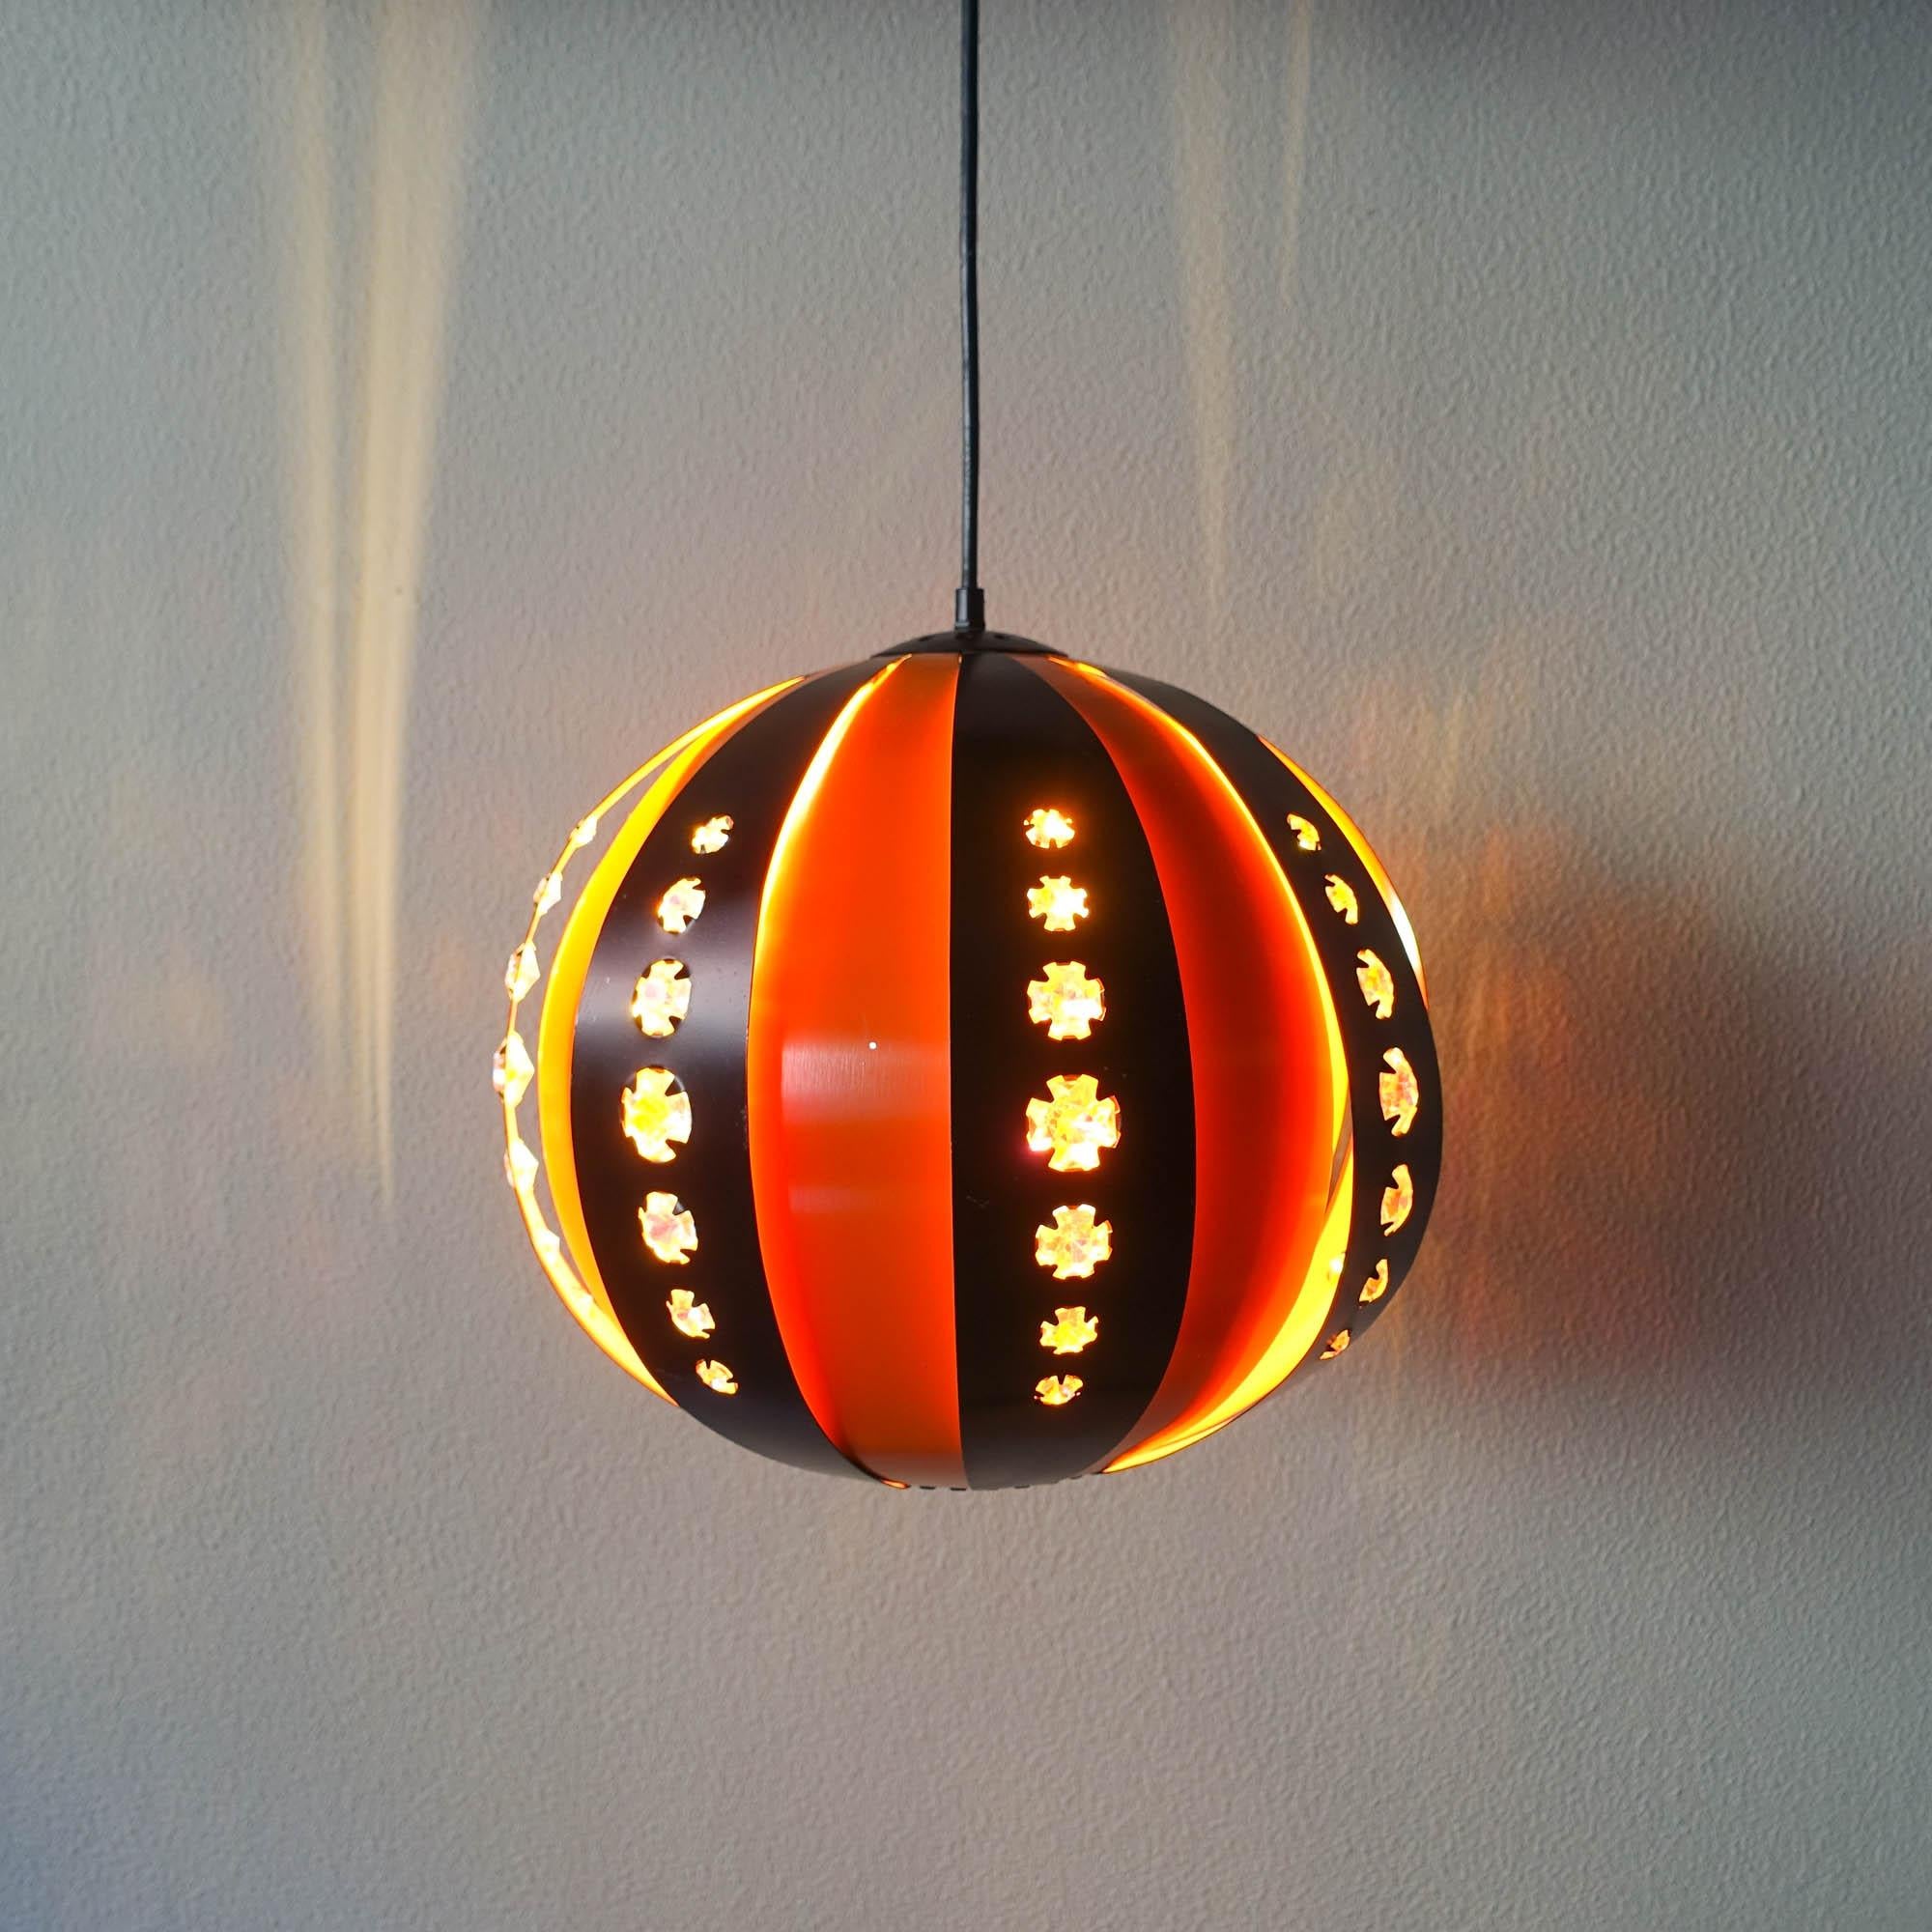 This pendant lamp was designed by Werner Schou for Coronell Elektro, in Denmark during the 1907's. The lamp is made of aluminum in black and orange, with glass inserts in the black part. These glasses reflect the light and helps to spread a warm